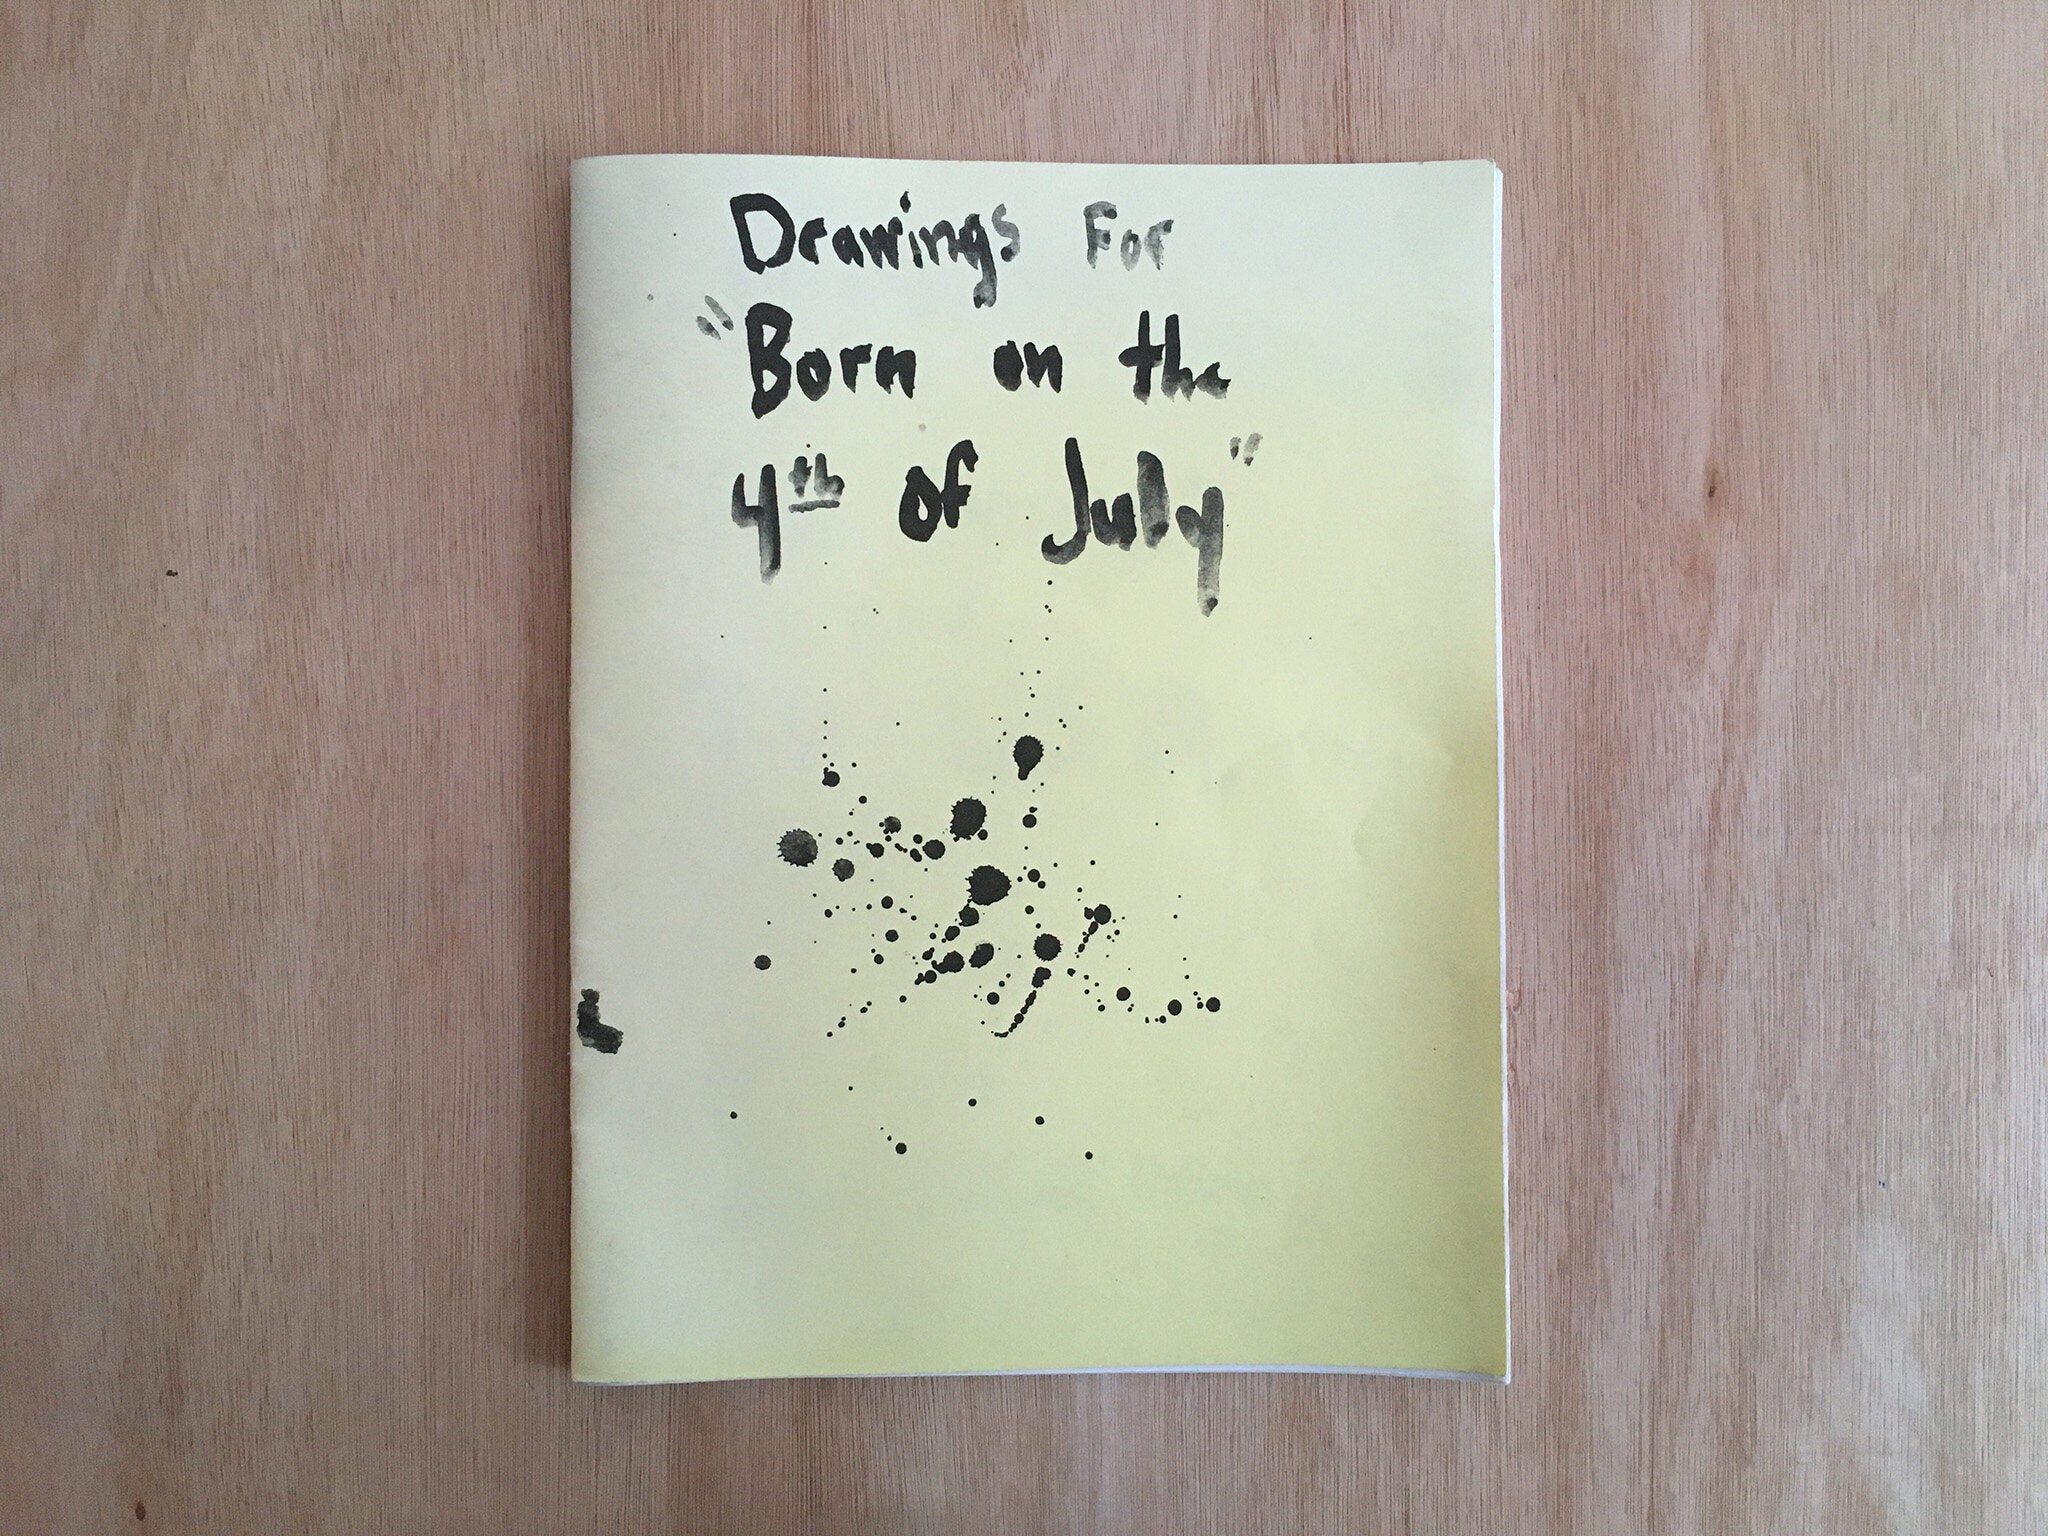 DRAWINGS FOR 'BORN ON THE 4TH OF JULY' by Jason Roberts Dobrin